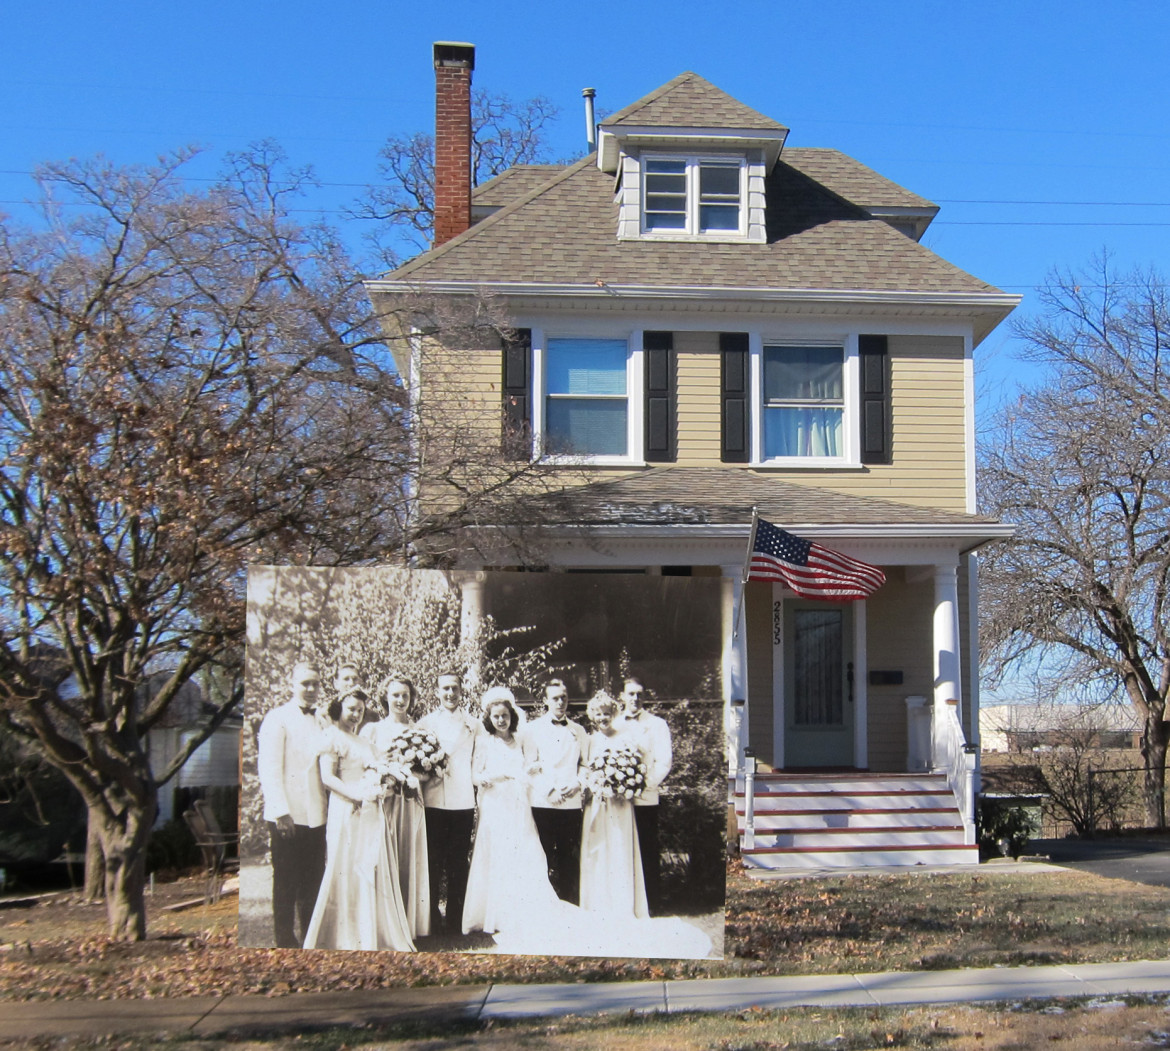 The wedding party superimposed on a recent image of the home.  I think Marjorie would have to be pleased with the condition of her home today.